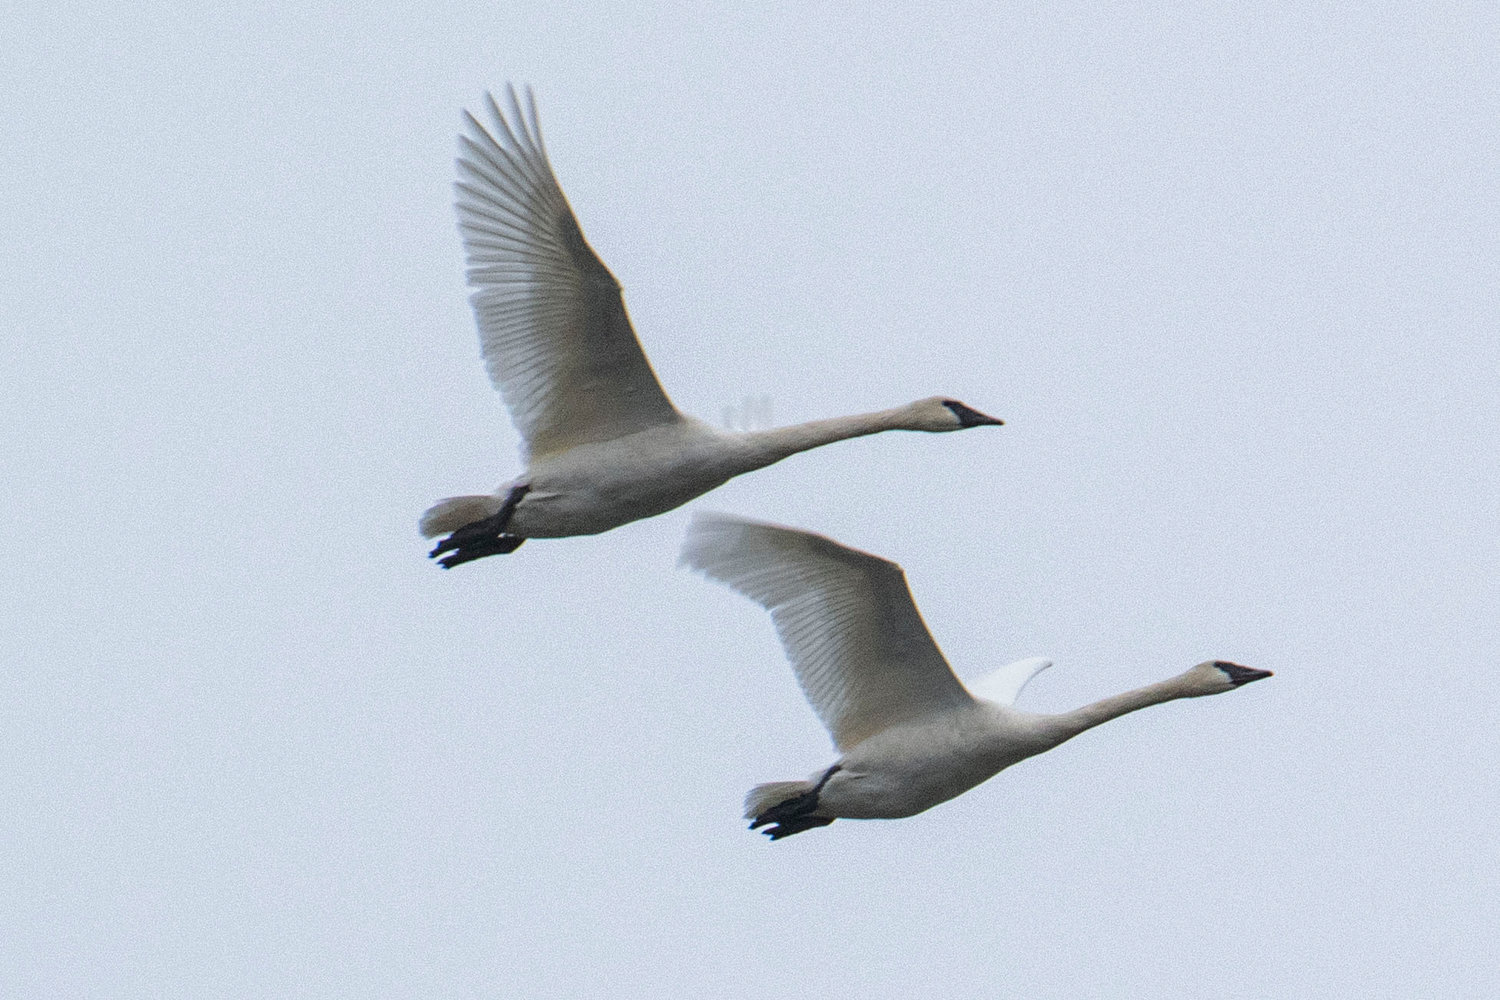 Trumpeter swans flap their wings together against gray skies on Friday in Chehalis.